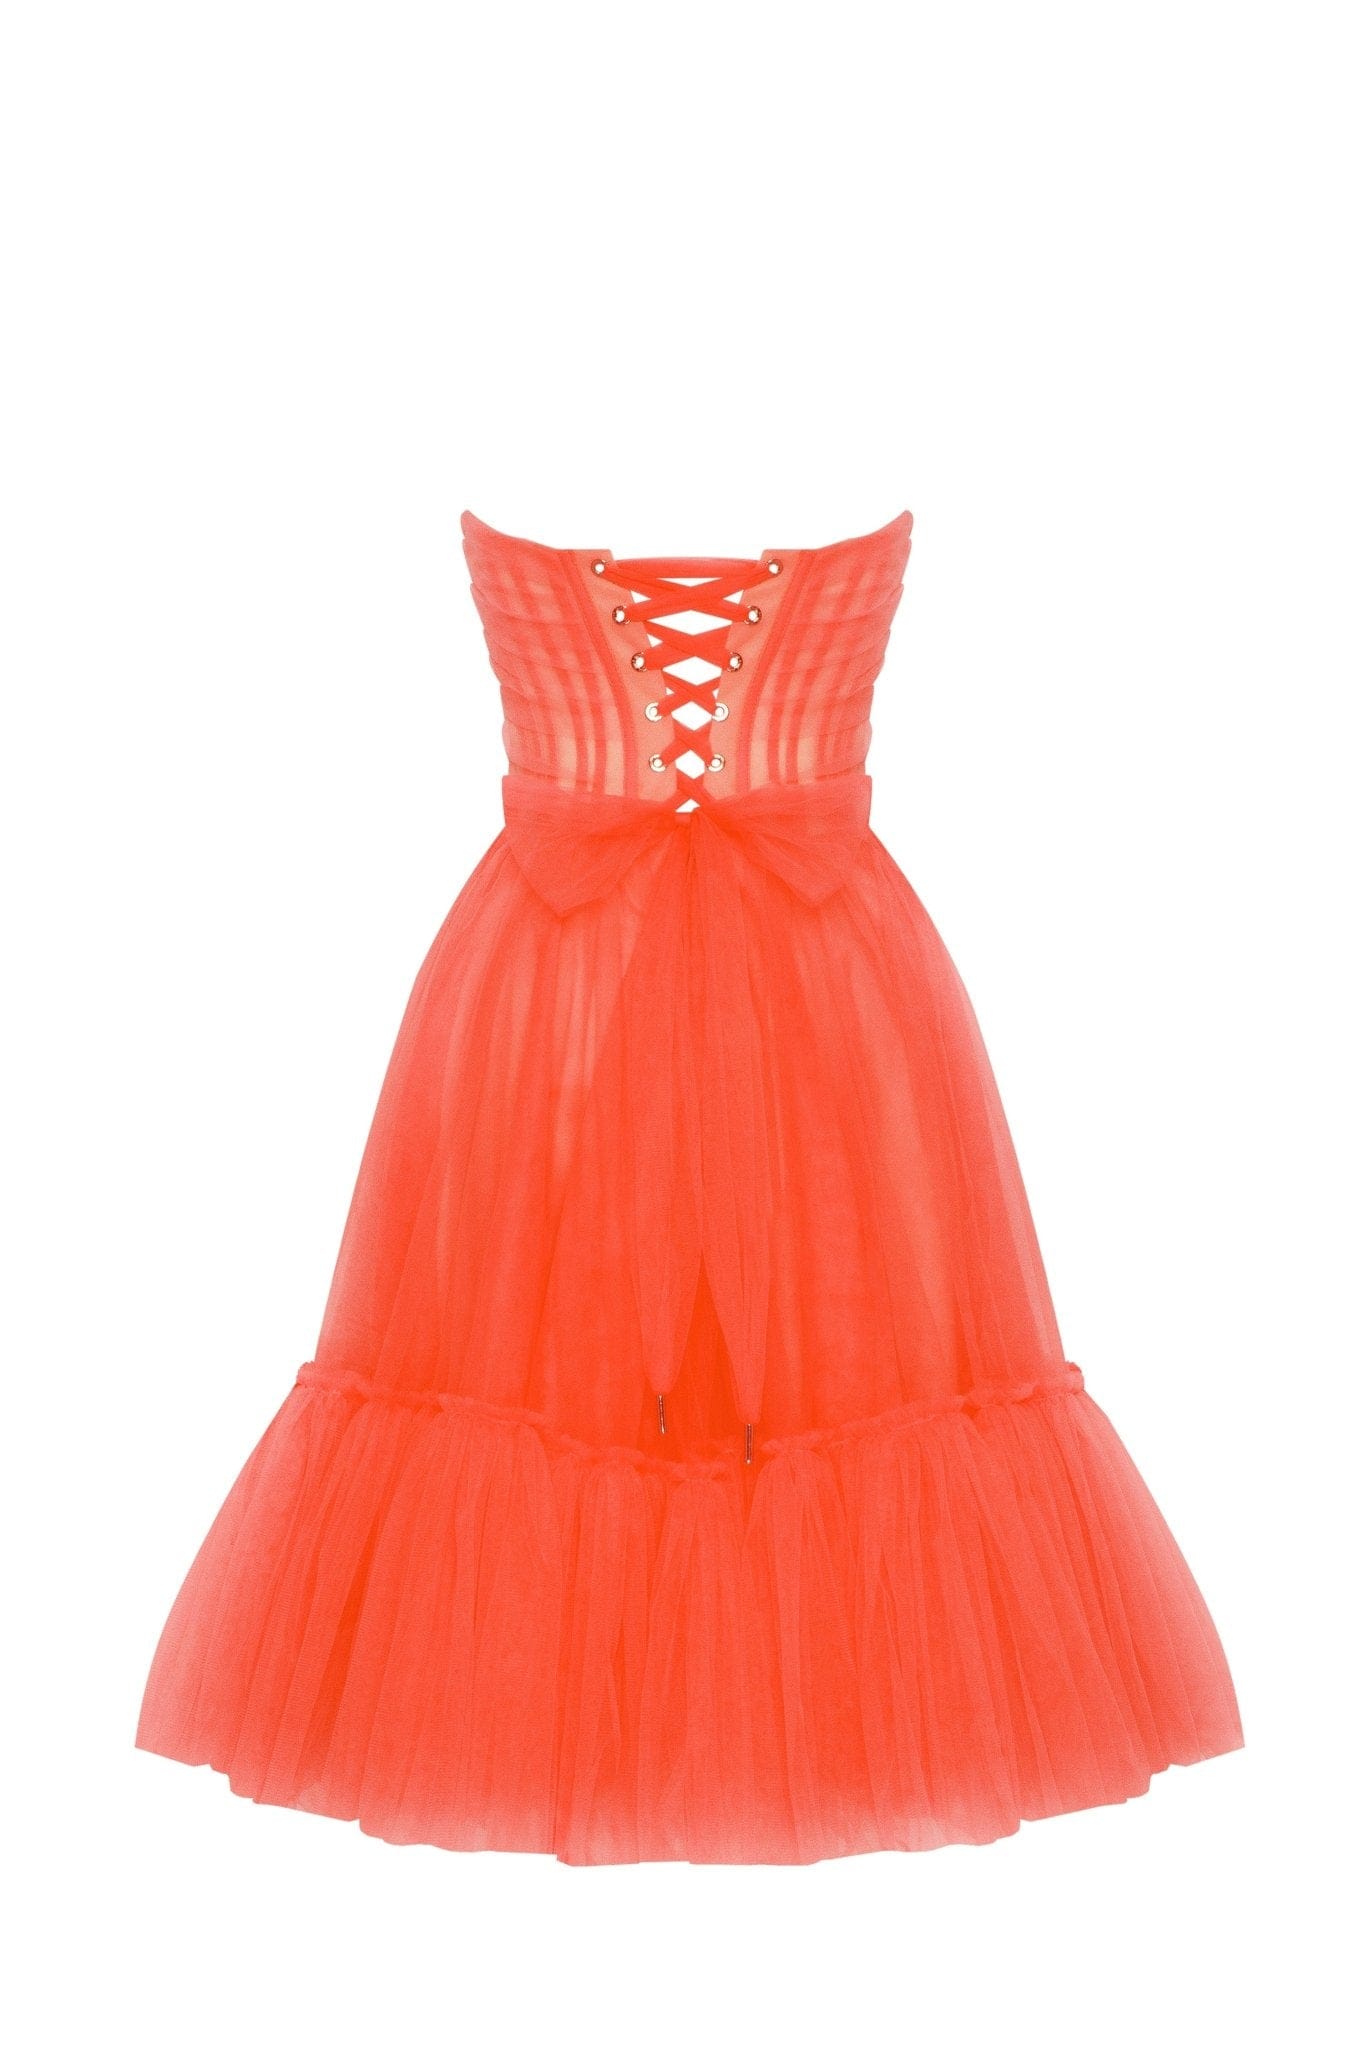 Passion Strapless Tulle mini dress in red coral color - Milla